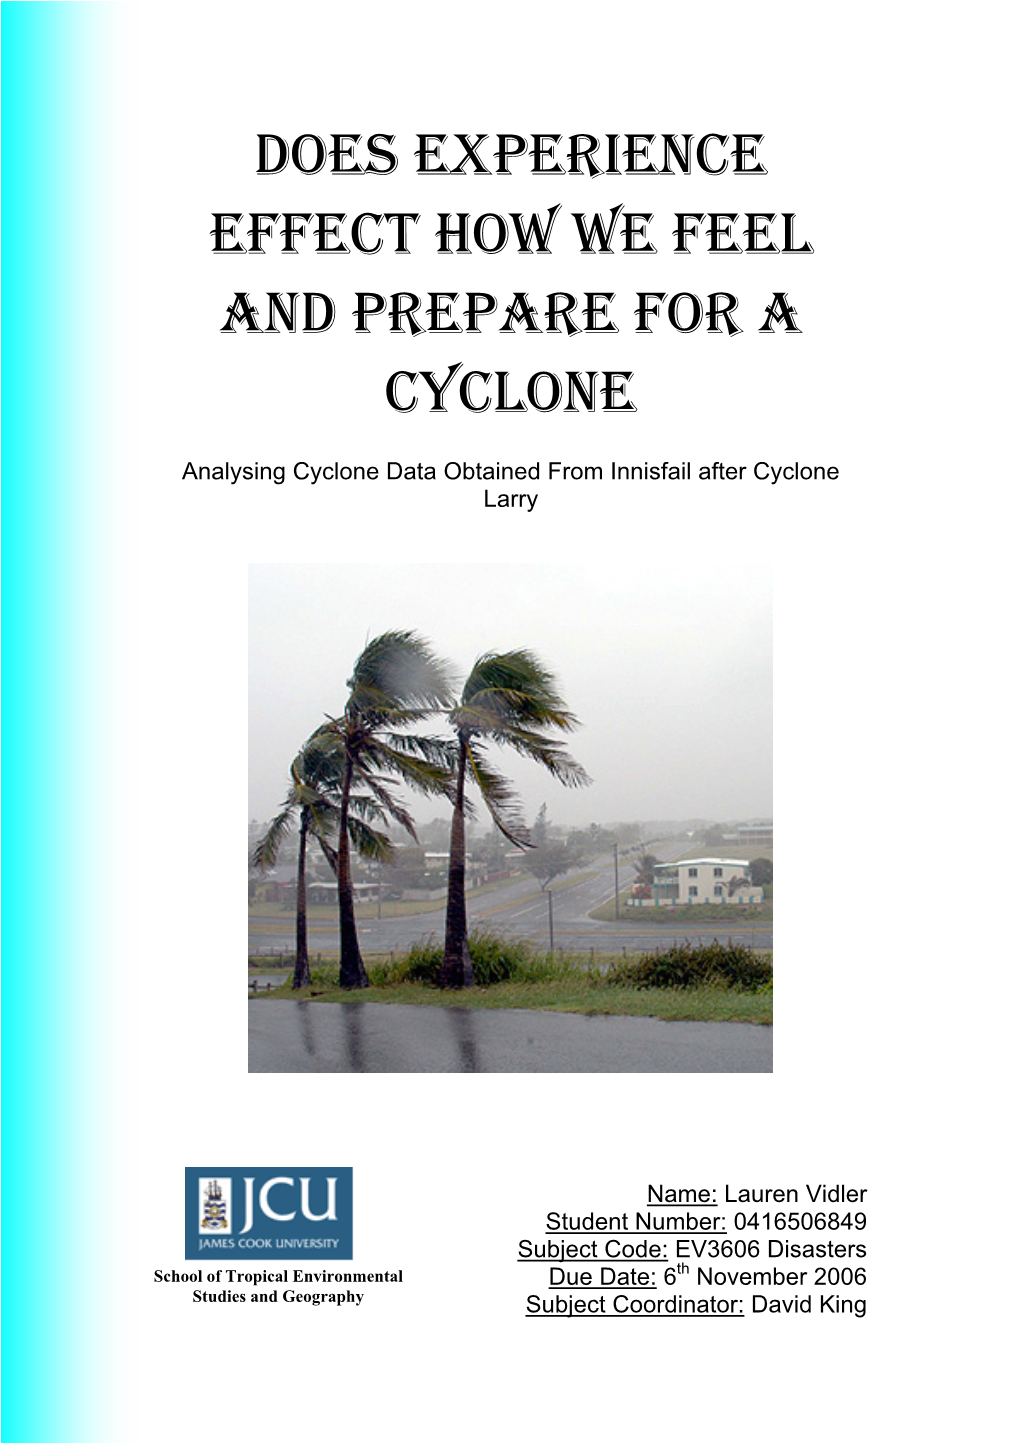 Does Experience Effect How We Feel and Prepare for a Cyclone